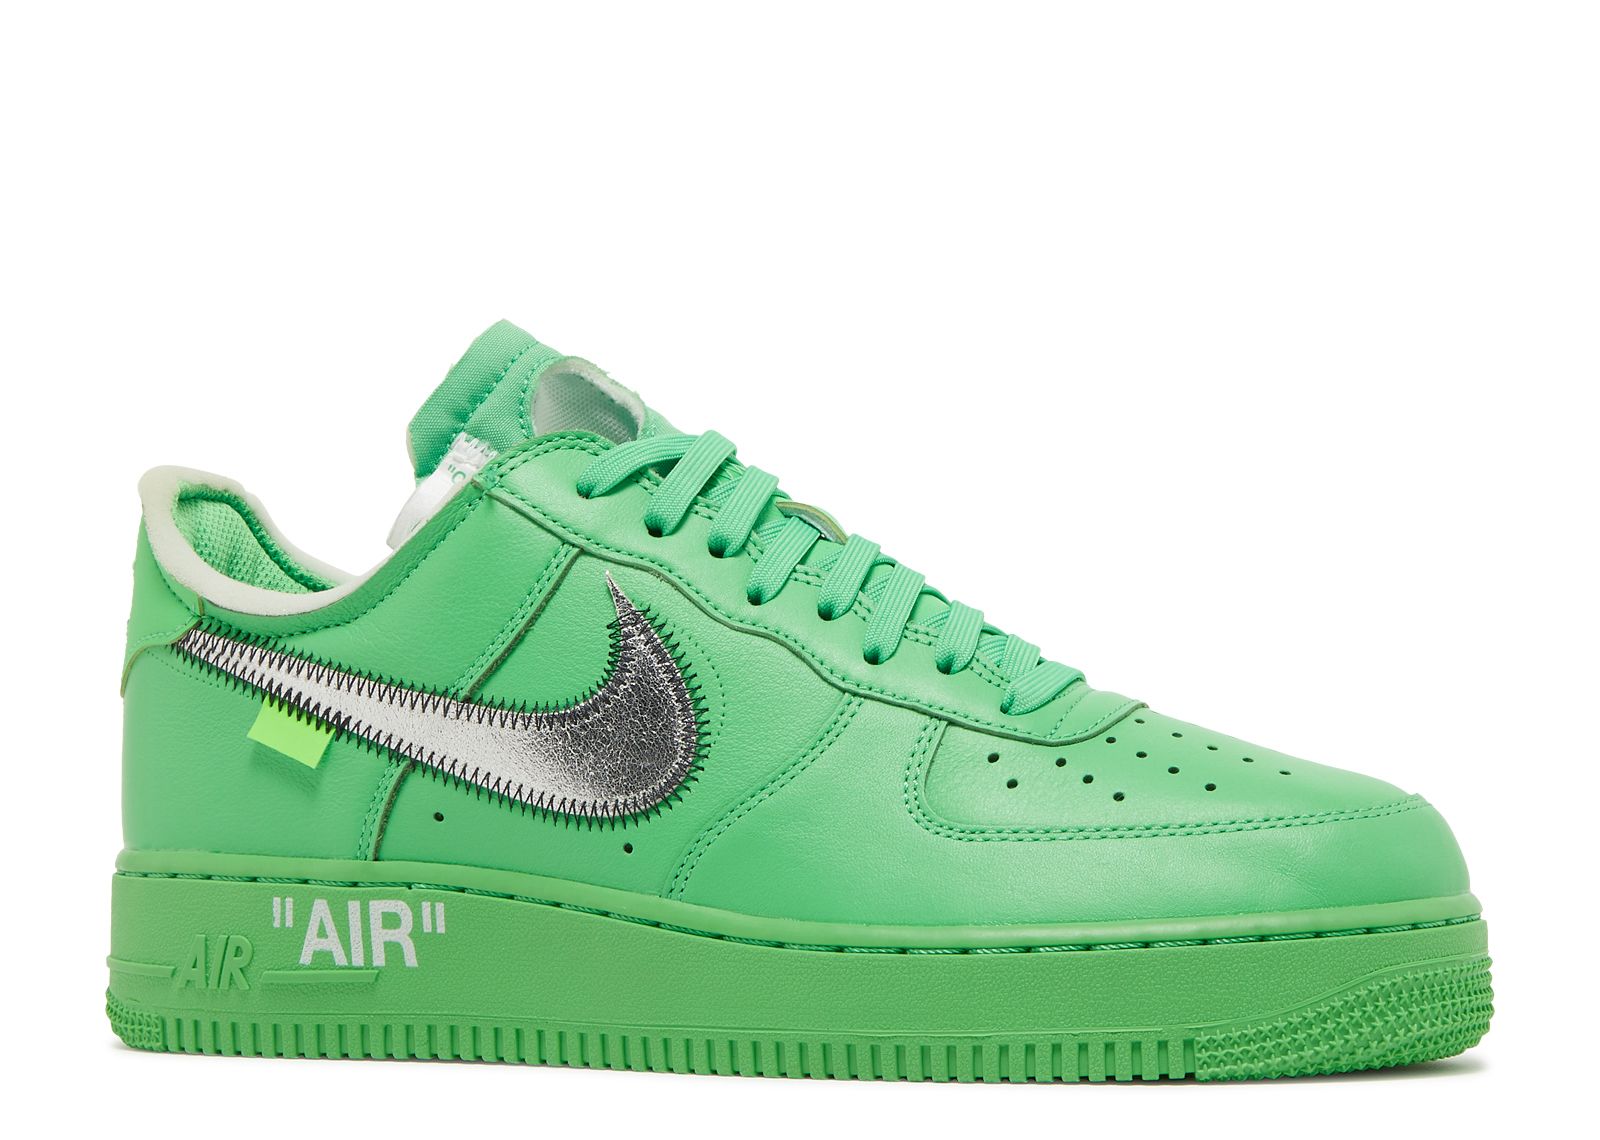 Off White X Force 1 Low - Nike - DX1419 300 - light green spark | Flight Club